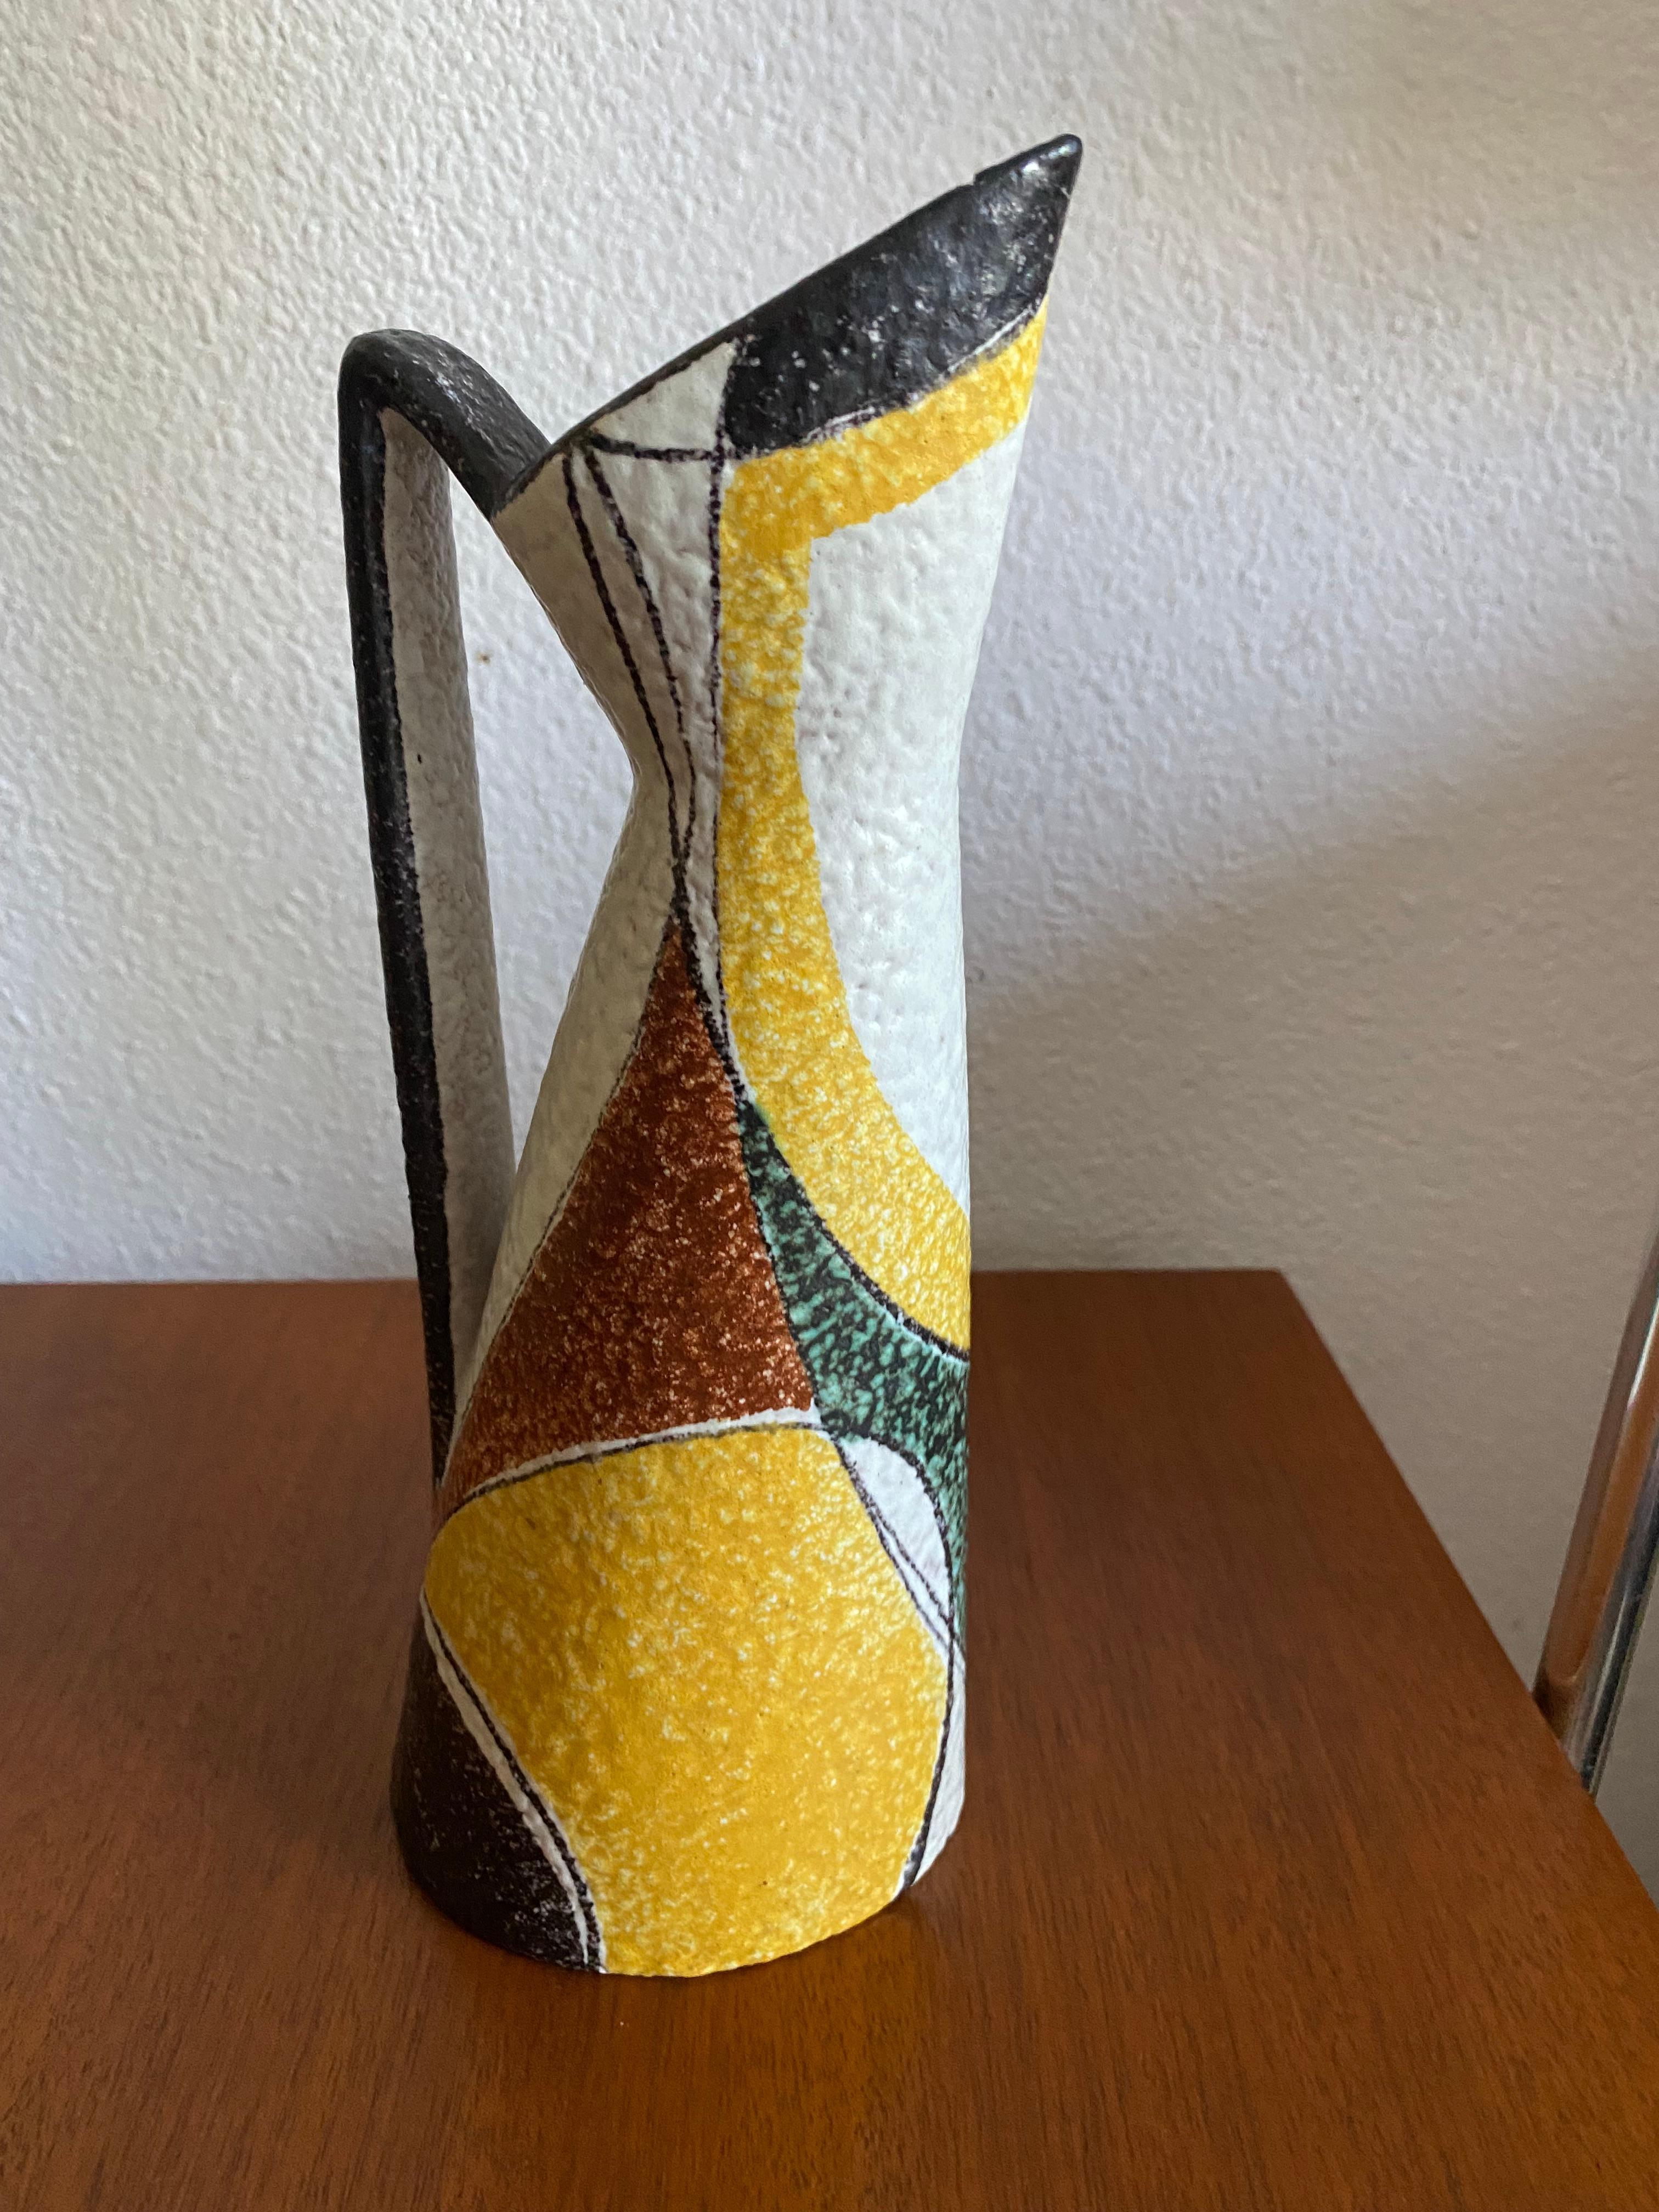 In a very good condition beautiful handpainted vase from Ruscha Keramik. Decor Milano and this pattern is one of the most stunning designs of the sixties.